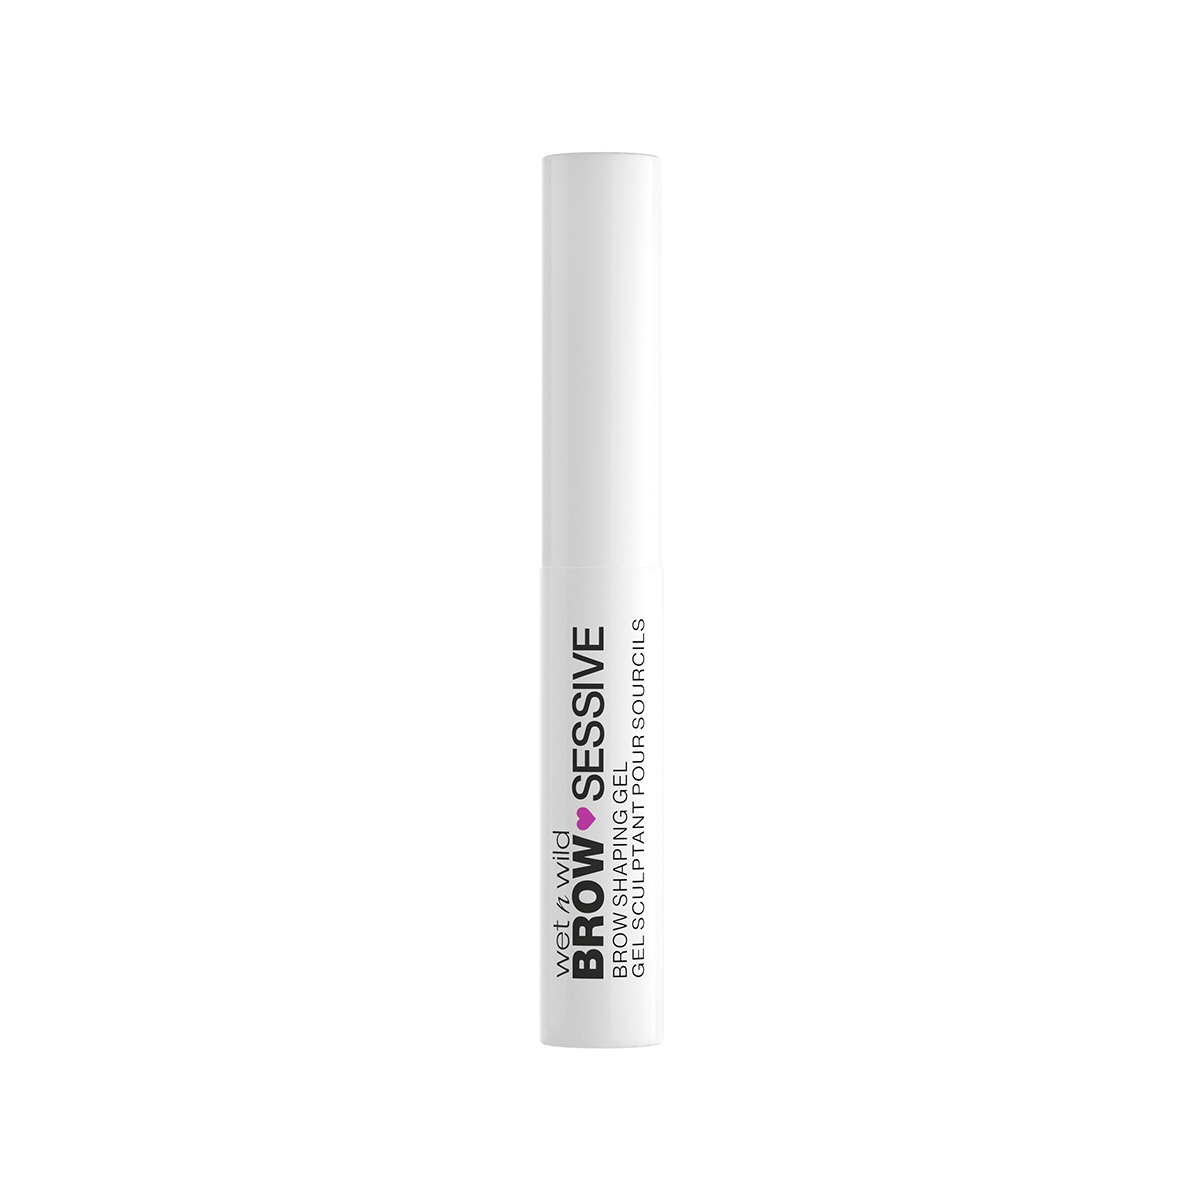 NEW! BROW-SESSIVE BROW SHAPING GEL Brown